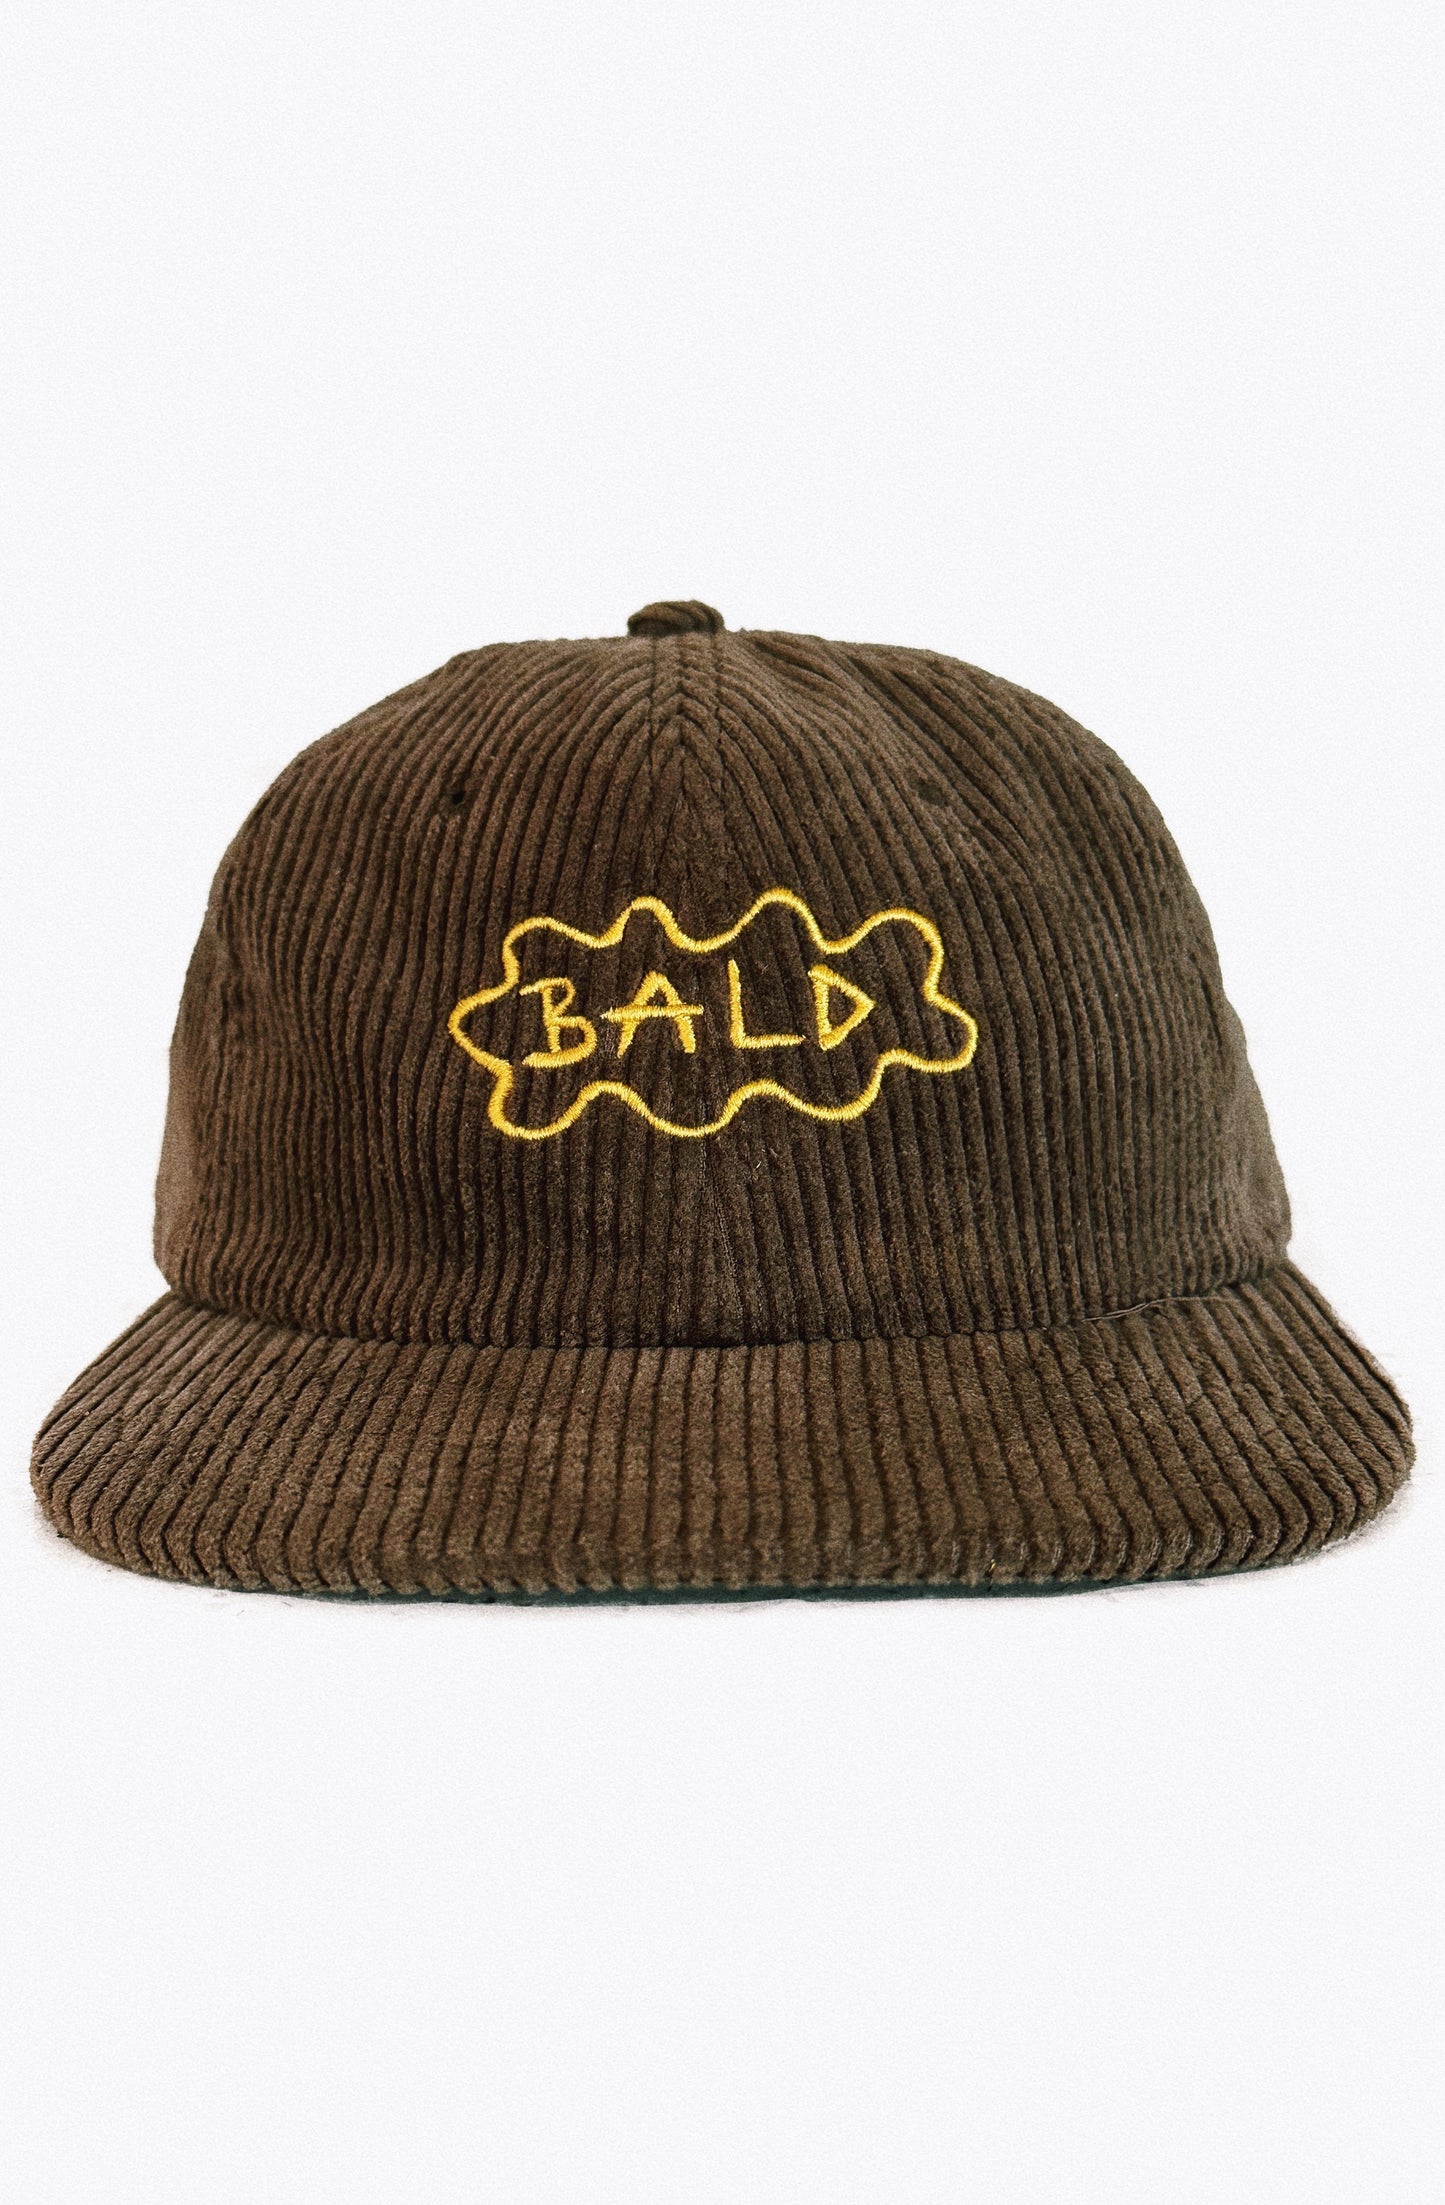 Bald Embroided Cap